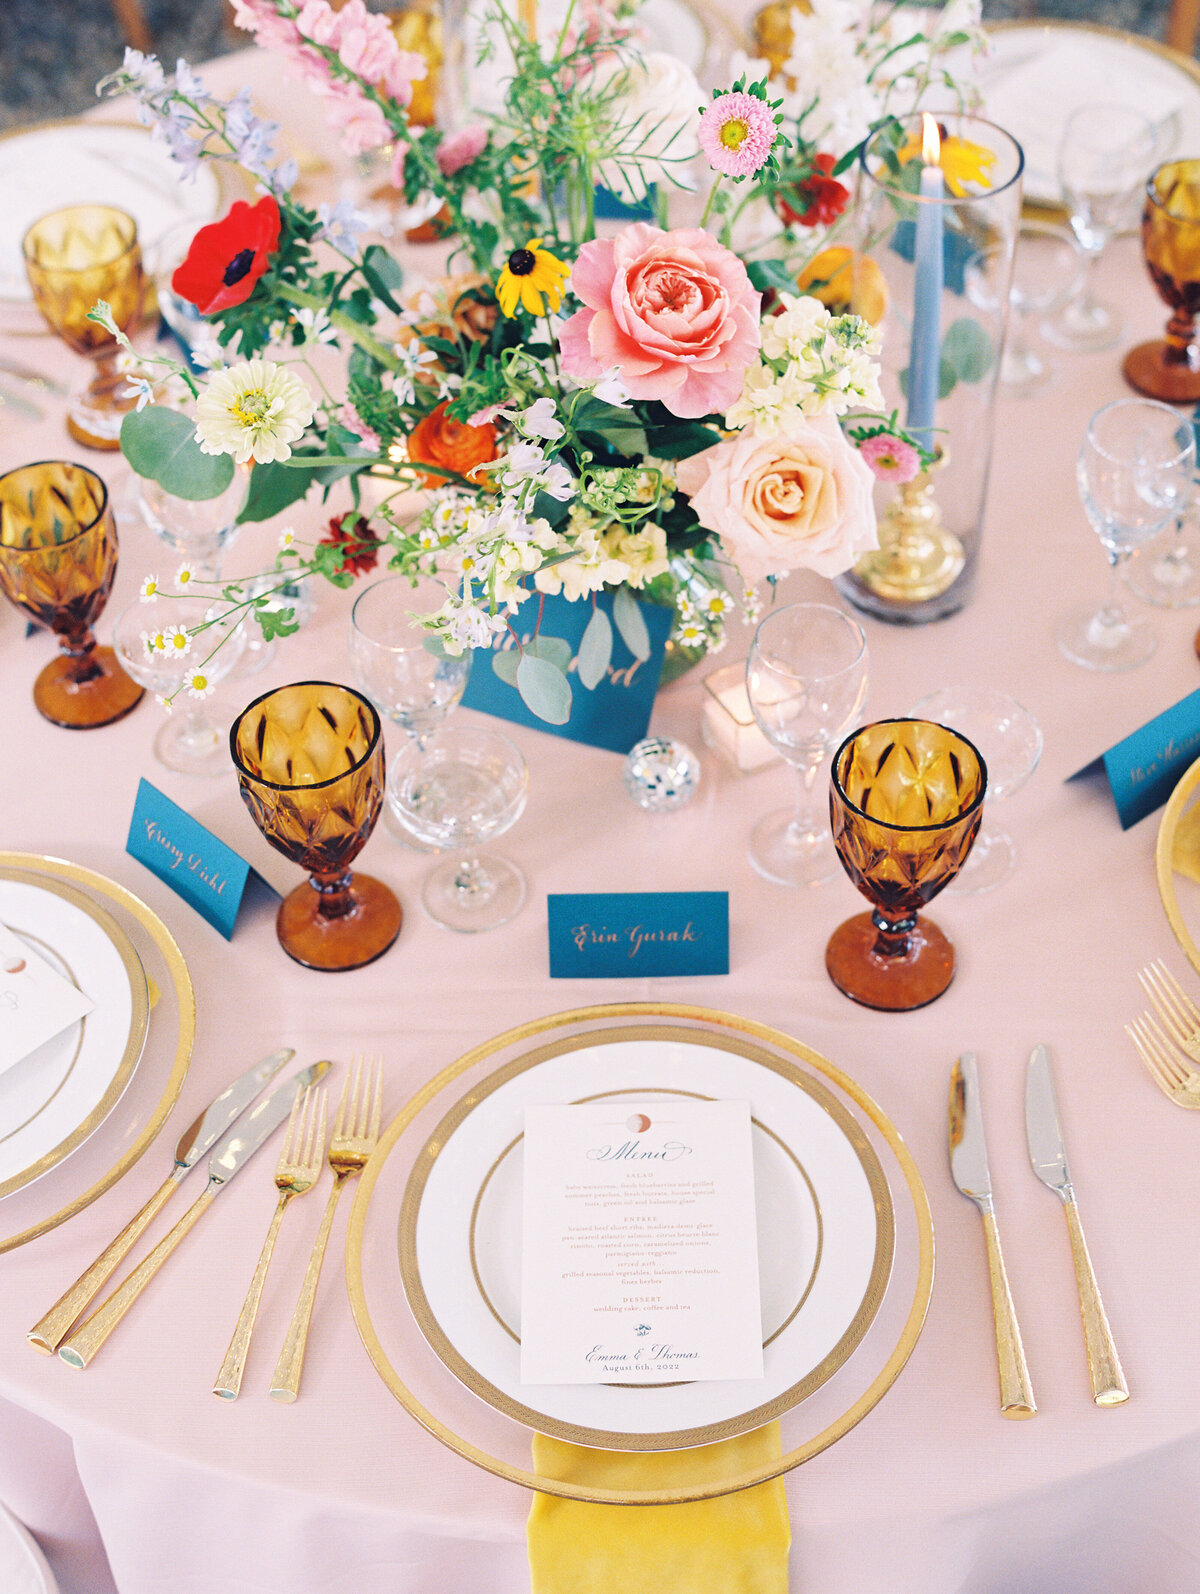 A colorful private lakeside wedding reception in New Hampshire